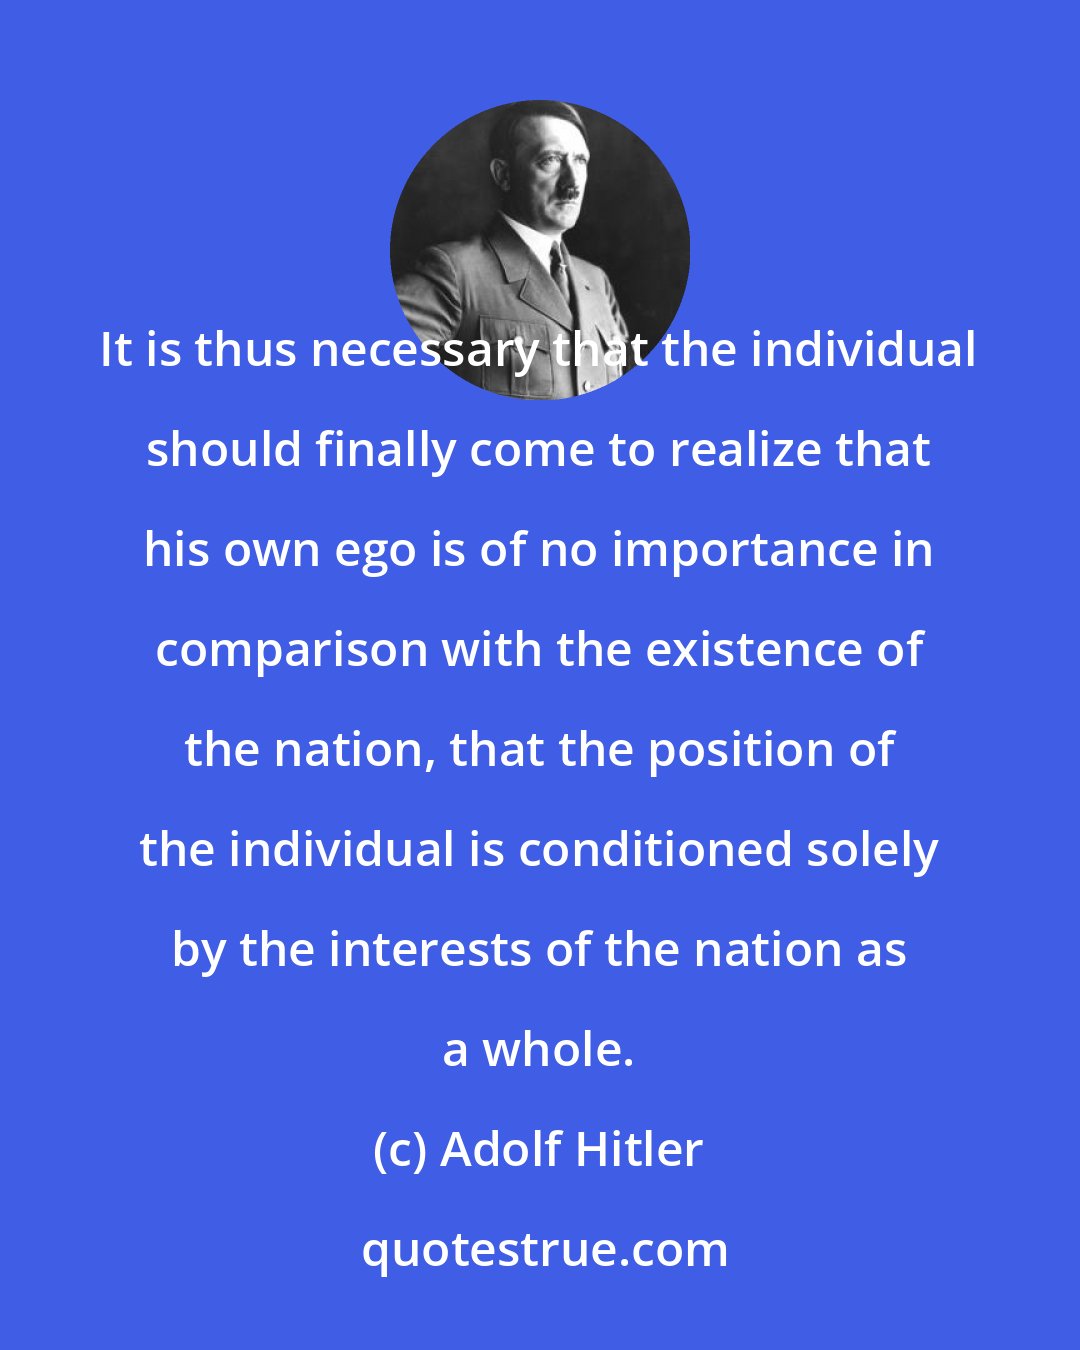 Adolf Hitler: It is thus necessary that the individual should finally come to realize that his own ego is of no importance in comparison with the existence of the nation, that the position of the individual is conditioned solely by the interests of the nation as a whole.